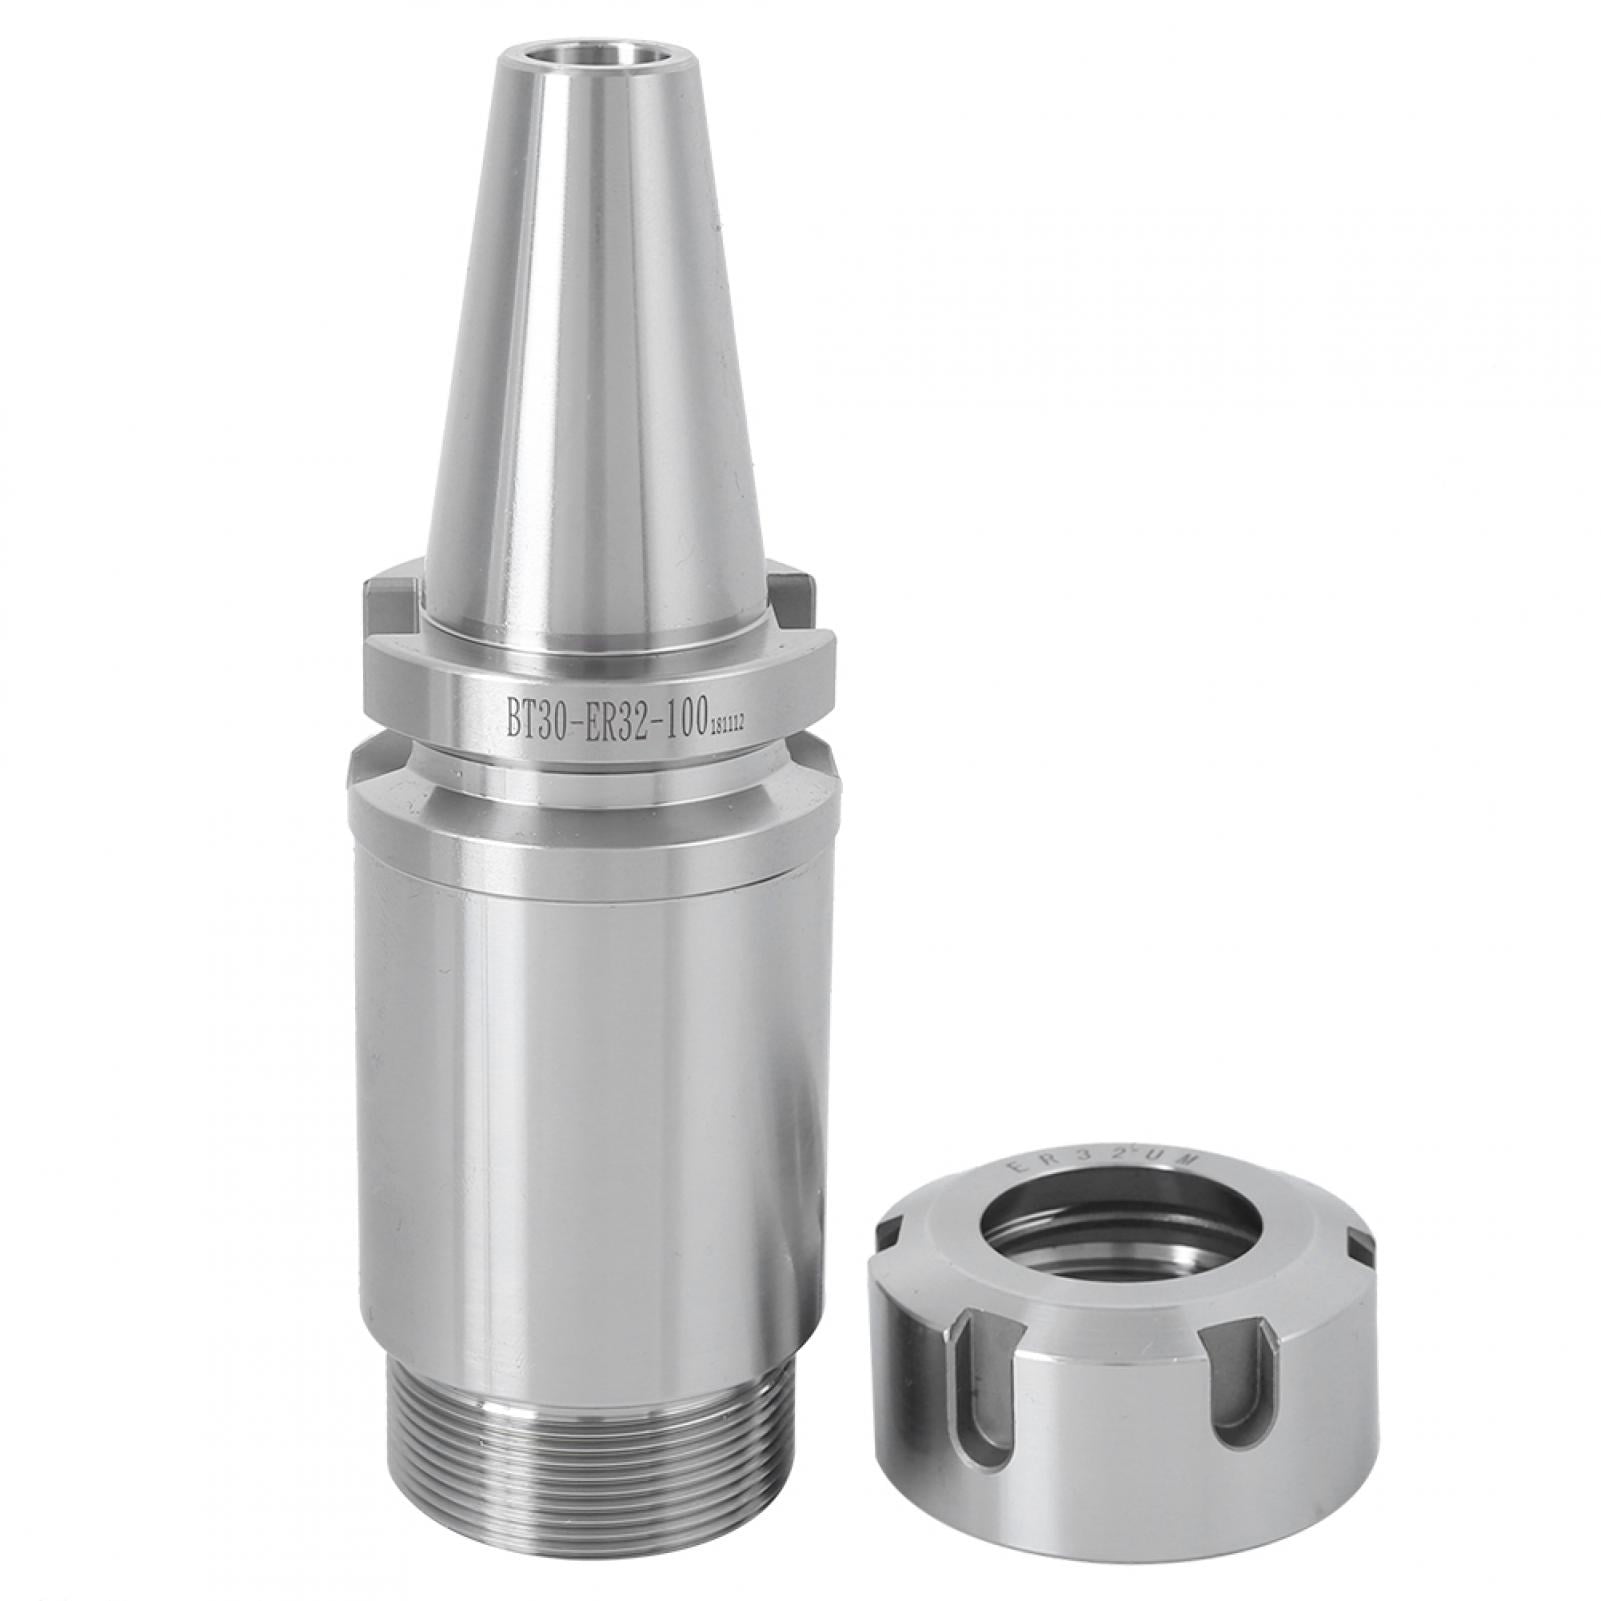  CNC Toolholder Collet Chuck Milling Lathe Tool High Accuracy40cr BT30‑ER32‑100 